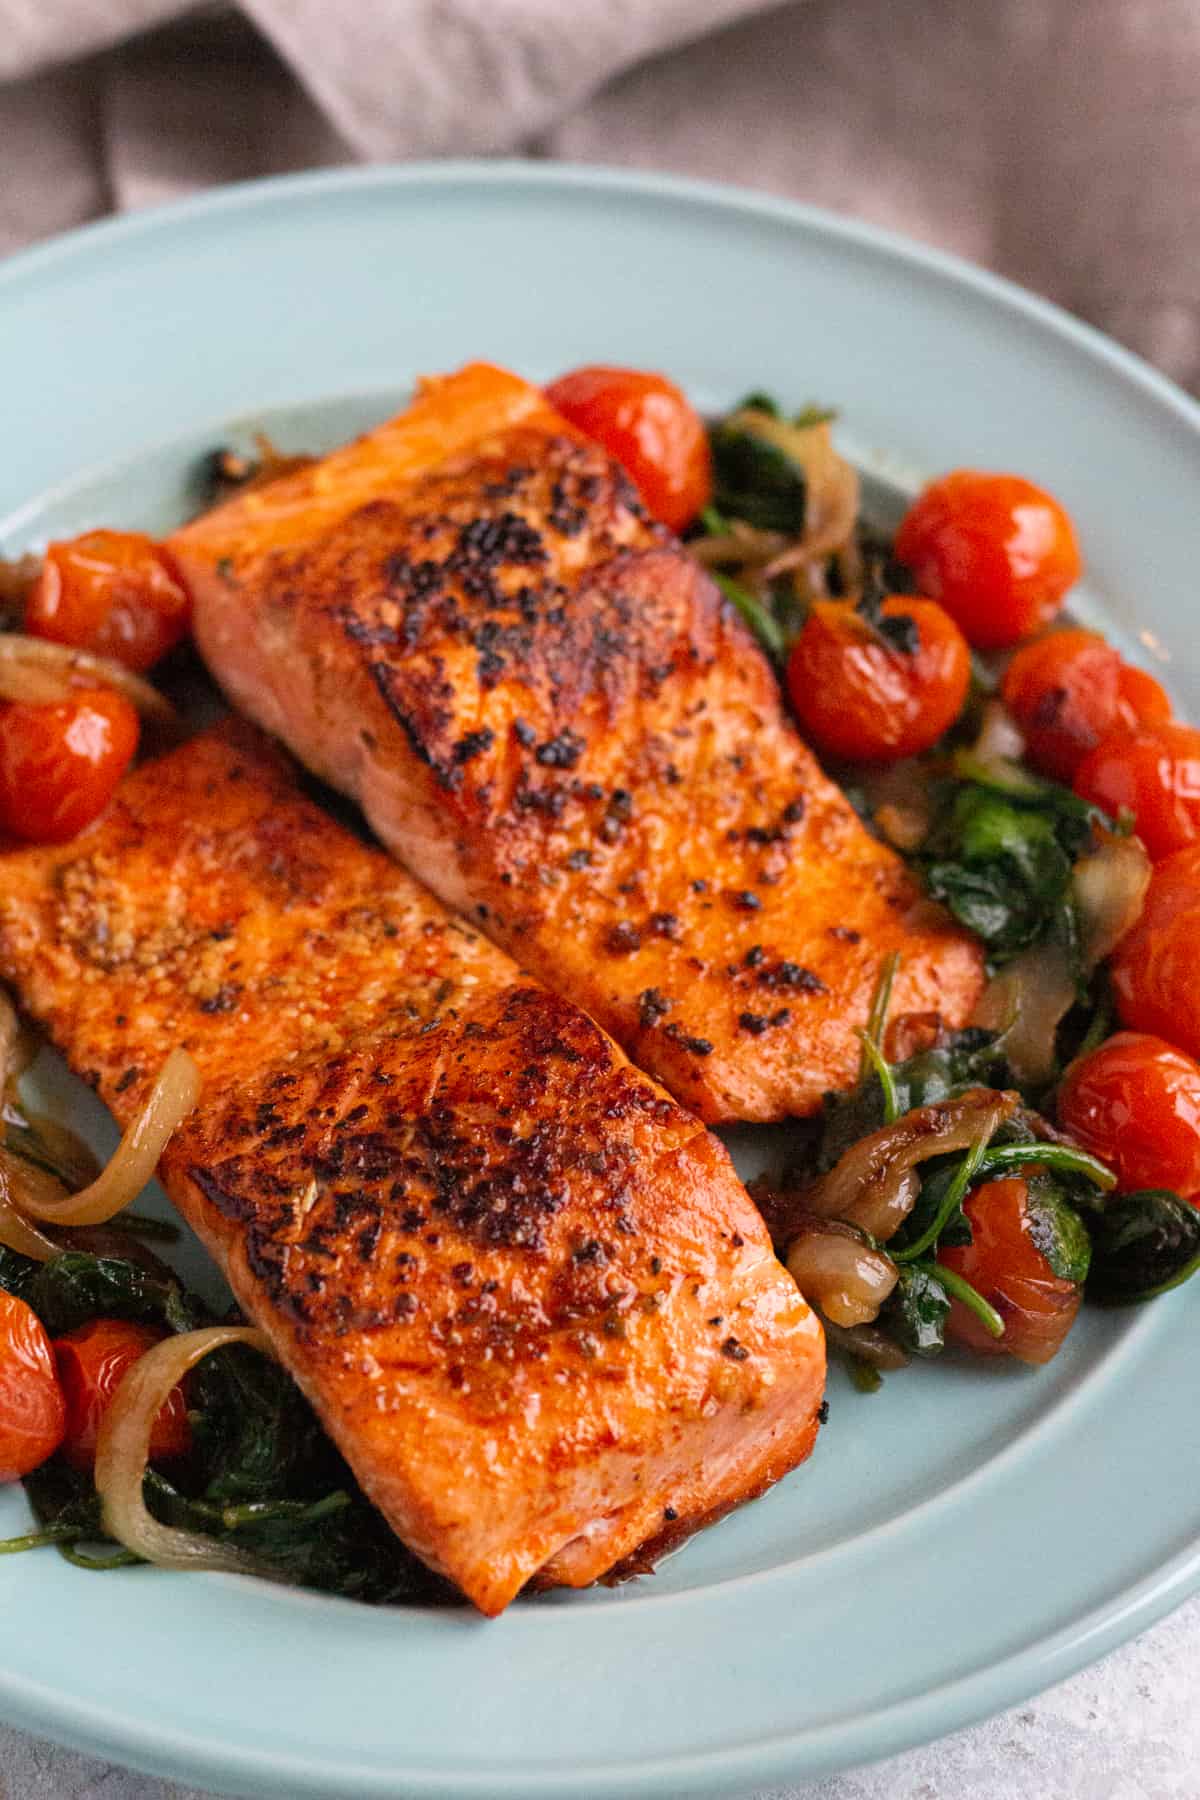 wo seared salmon fillets on a plate with cooked spinach and tomatoes. 